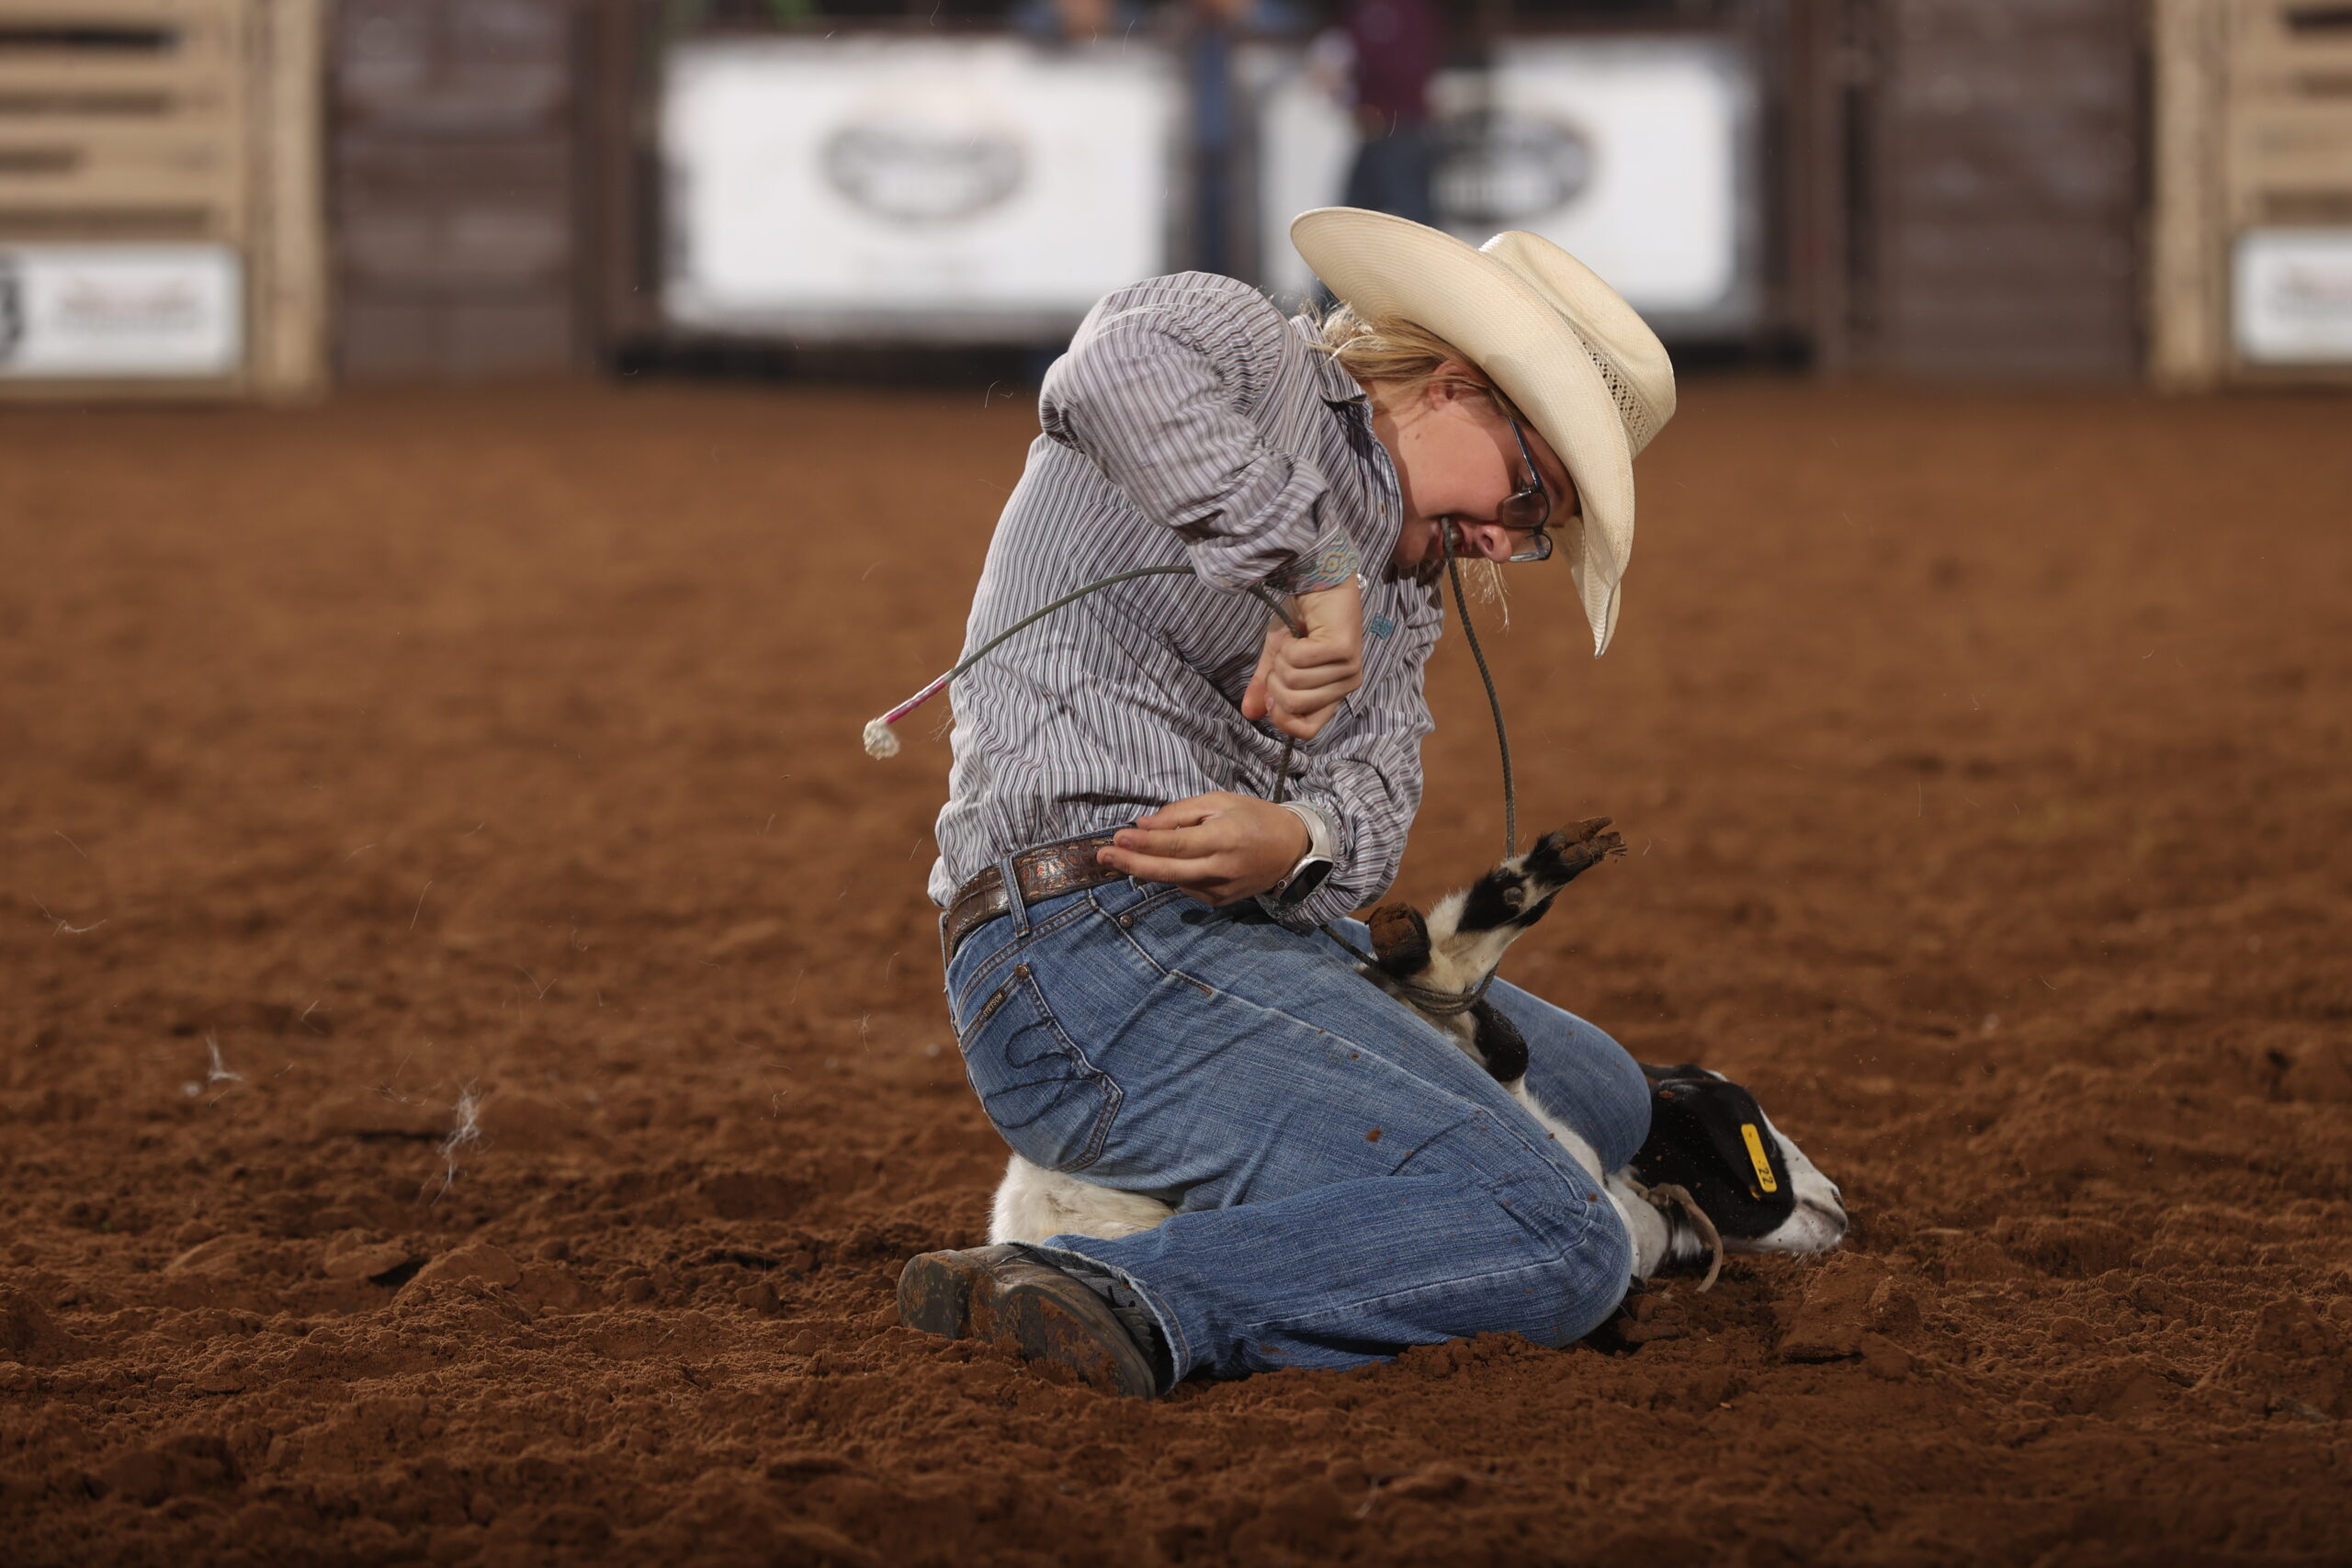 WCRA CEAT SPECIALTY DIVISION YOUTH SHOWCASE CHAMPIONS ARE CROWNED AT COWTOWN COLISEUM